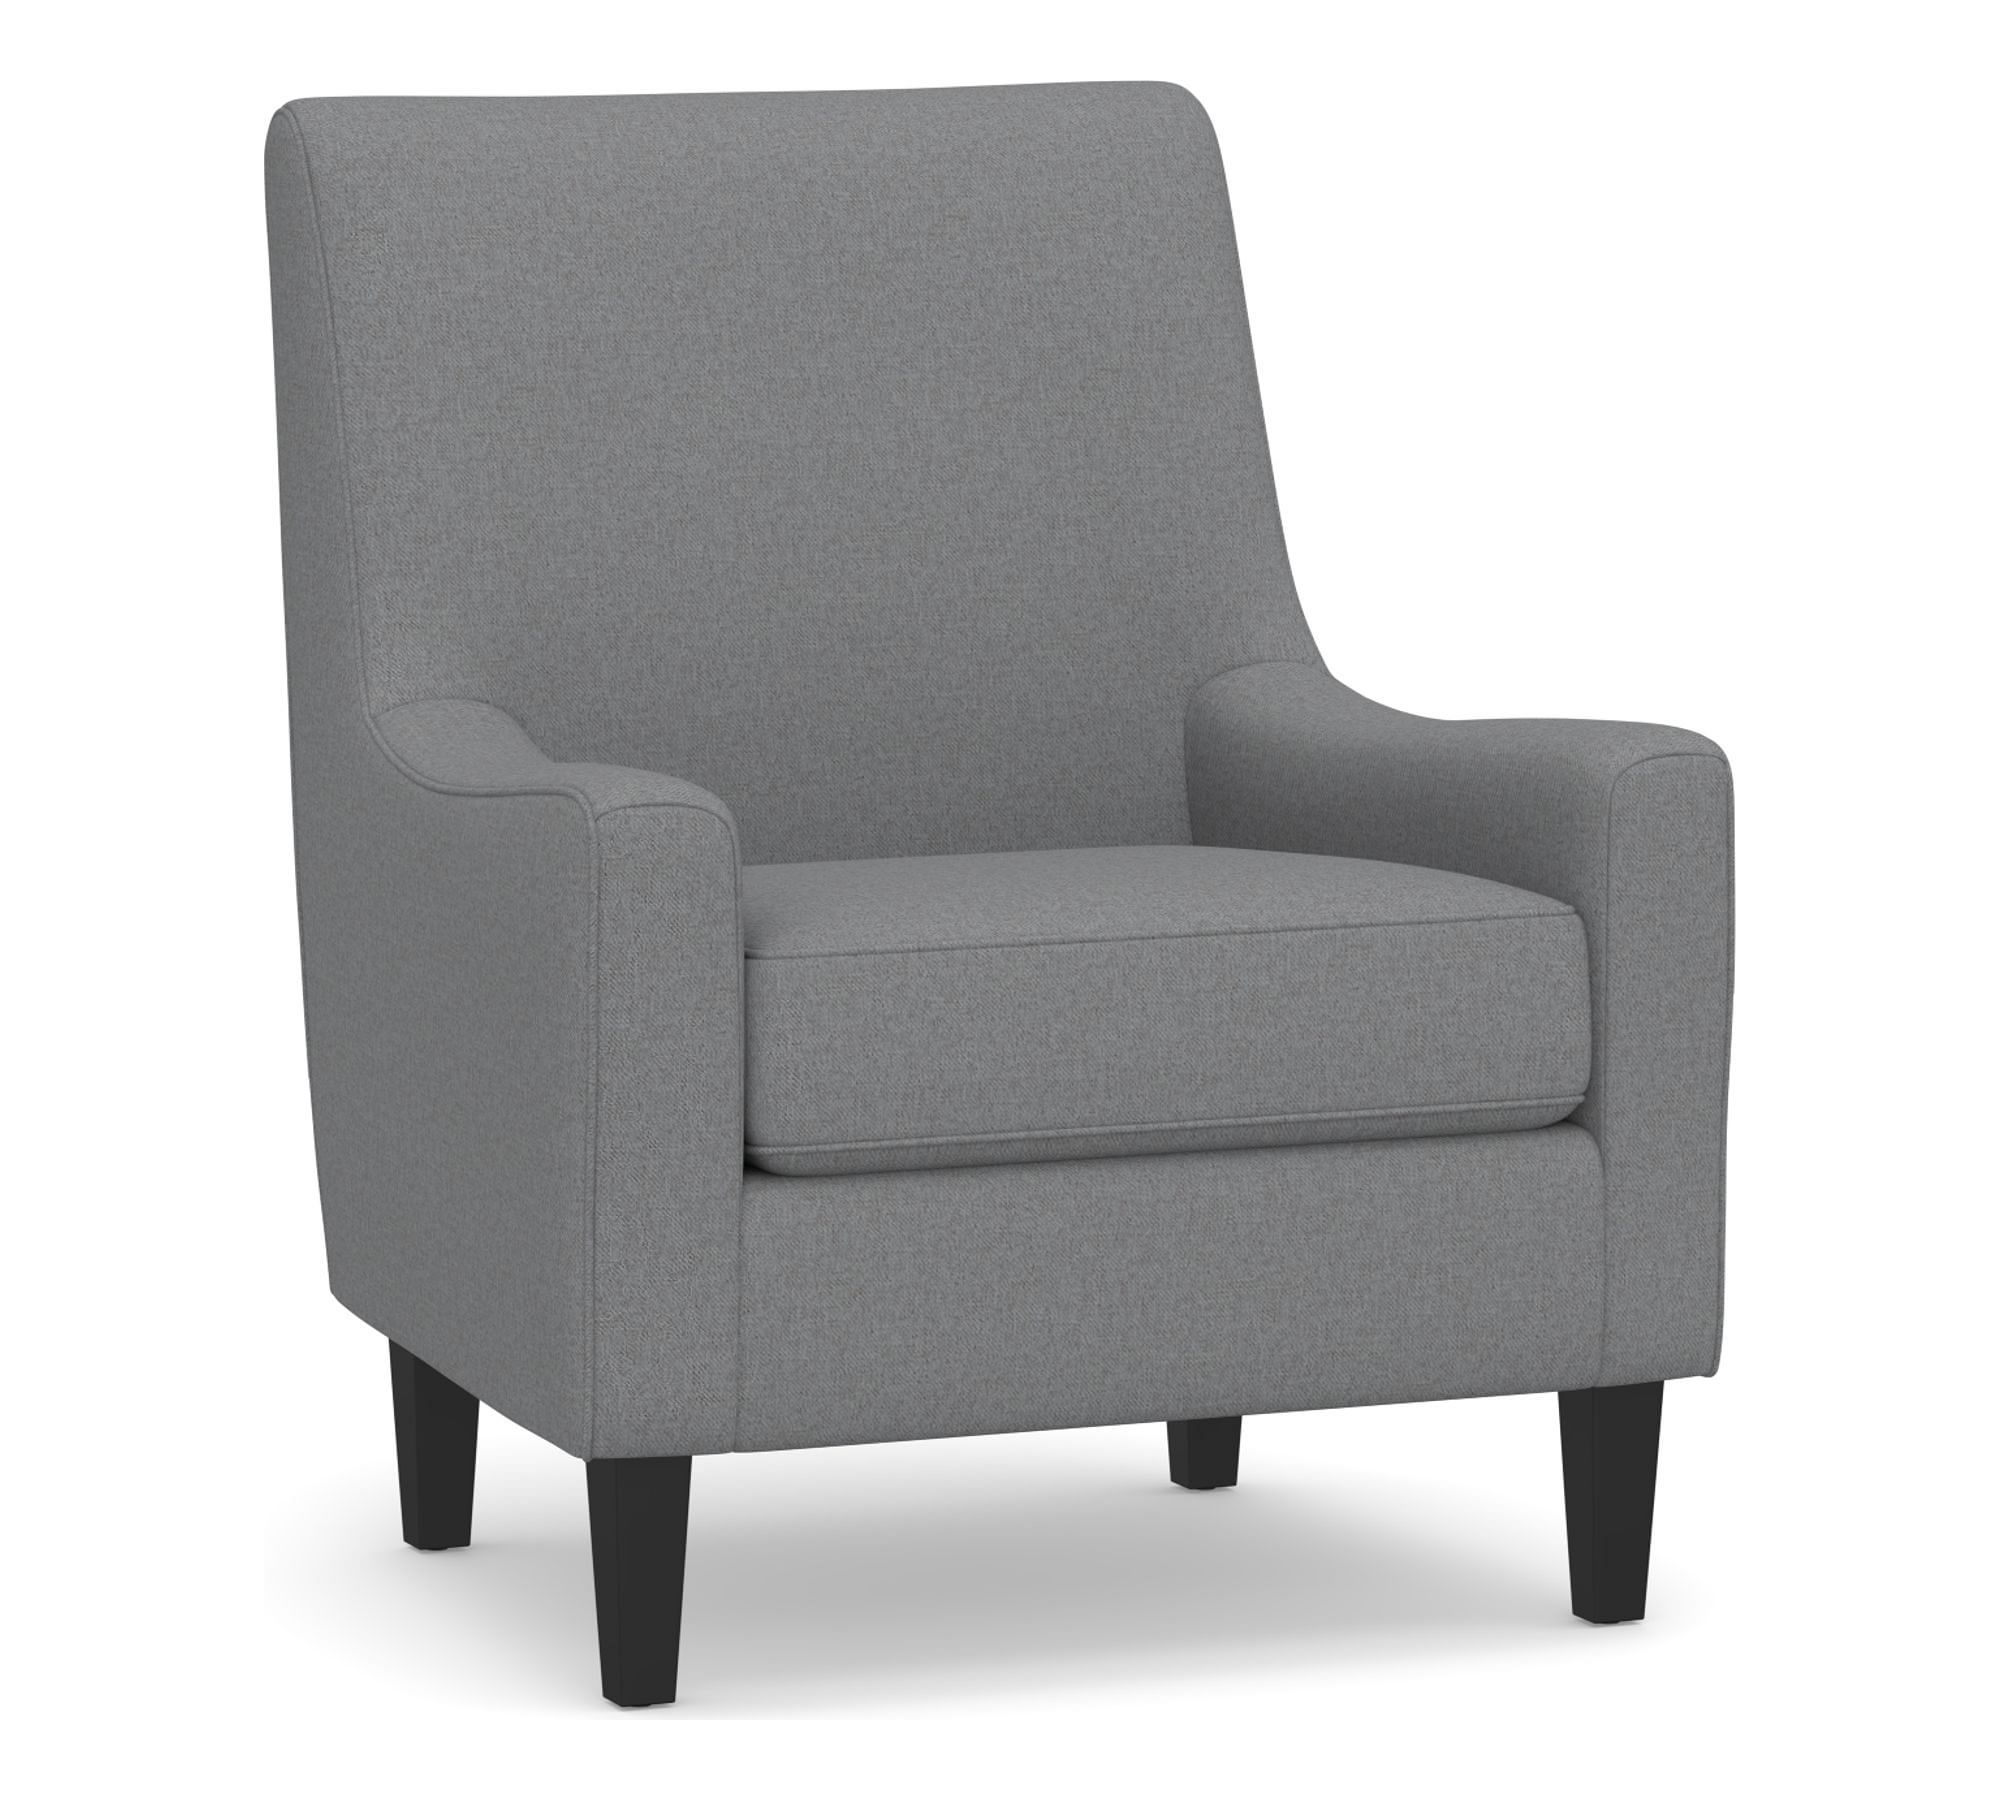 SoMa Isaac Upholstered Armchair, Polyester Wrapped Cushions, Textured Twill Light Gray - Image 4